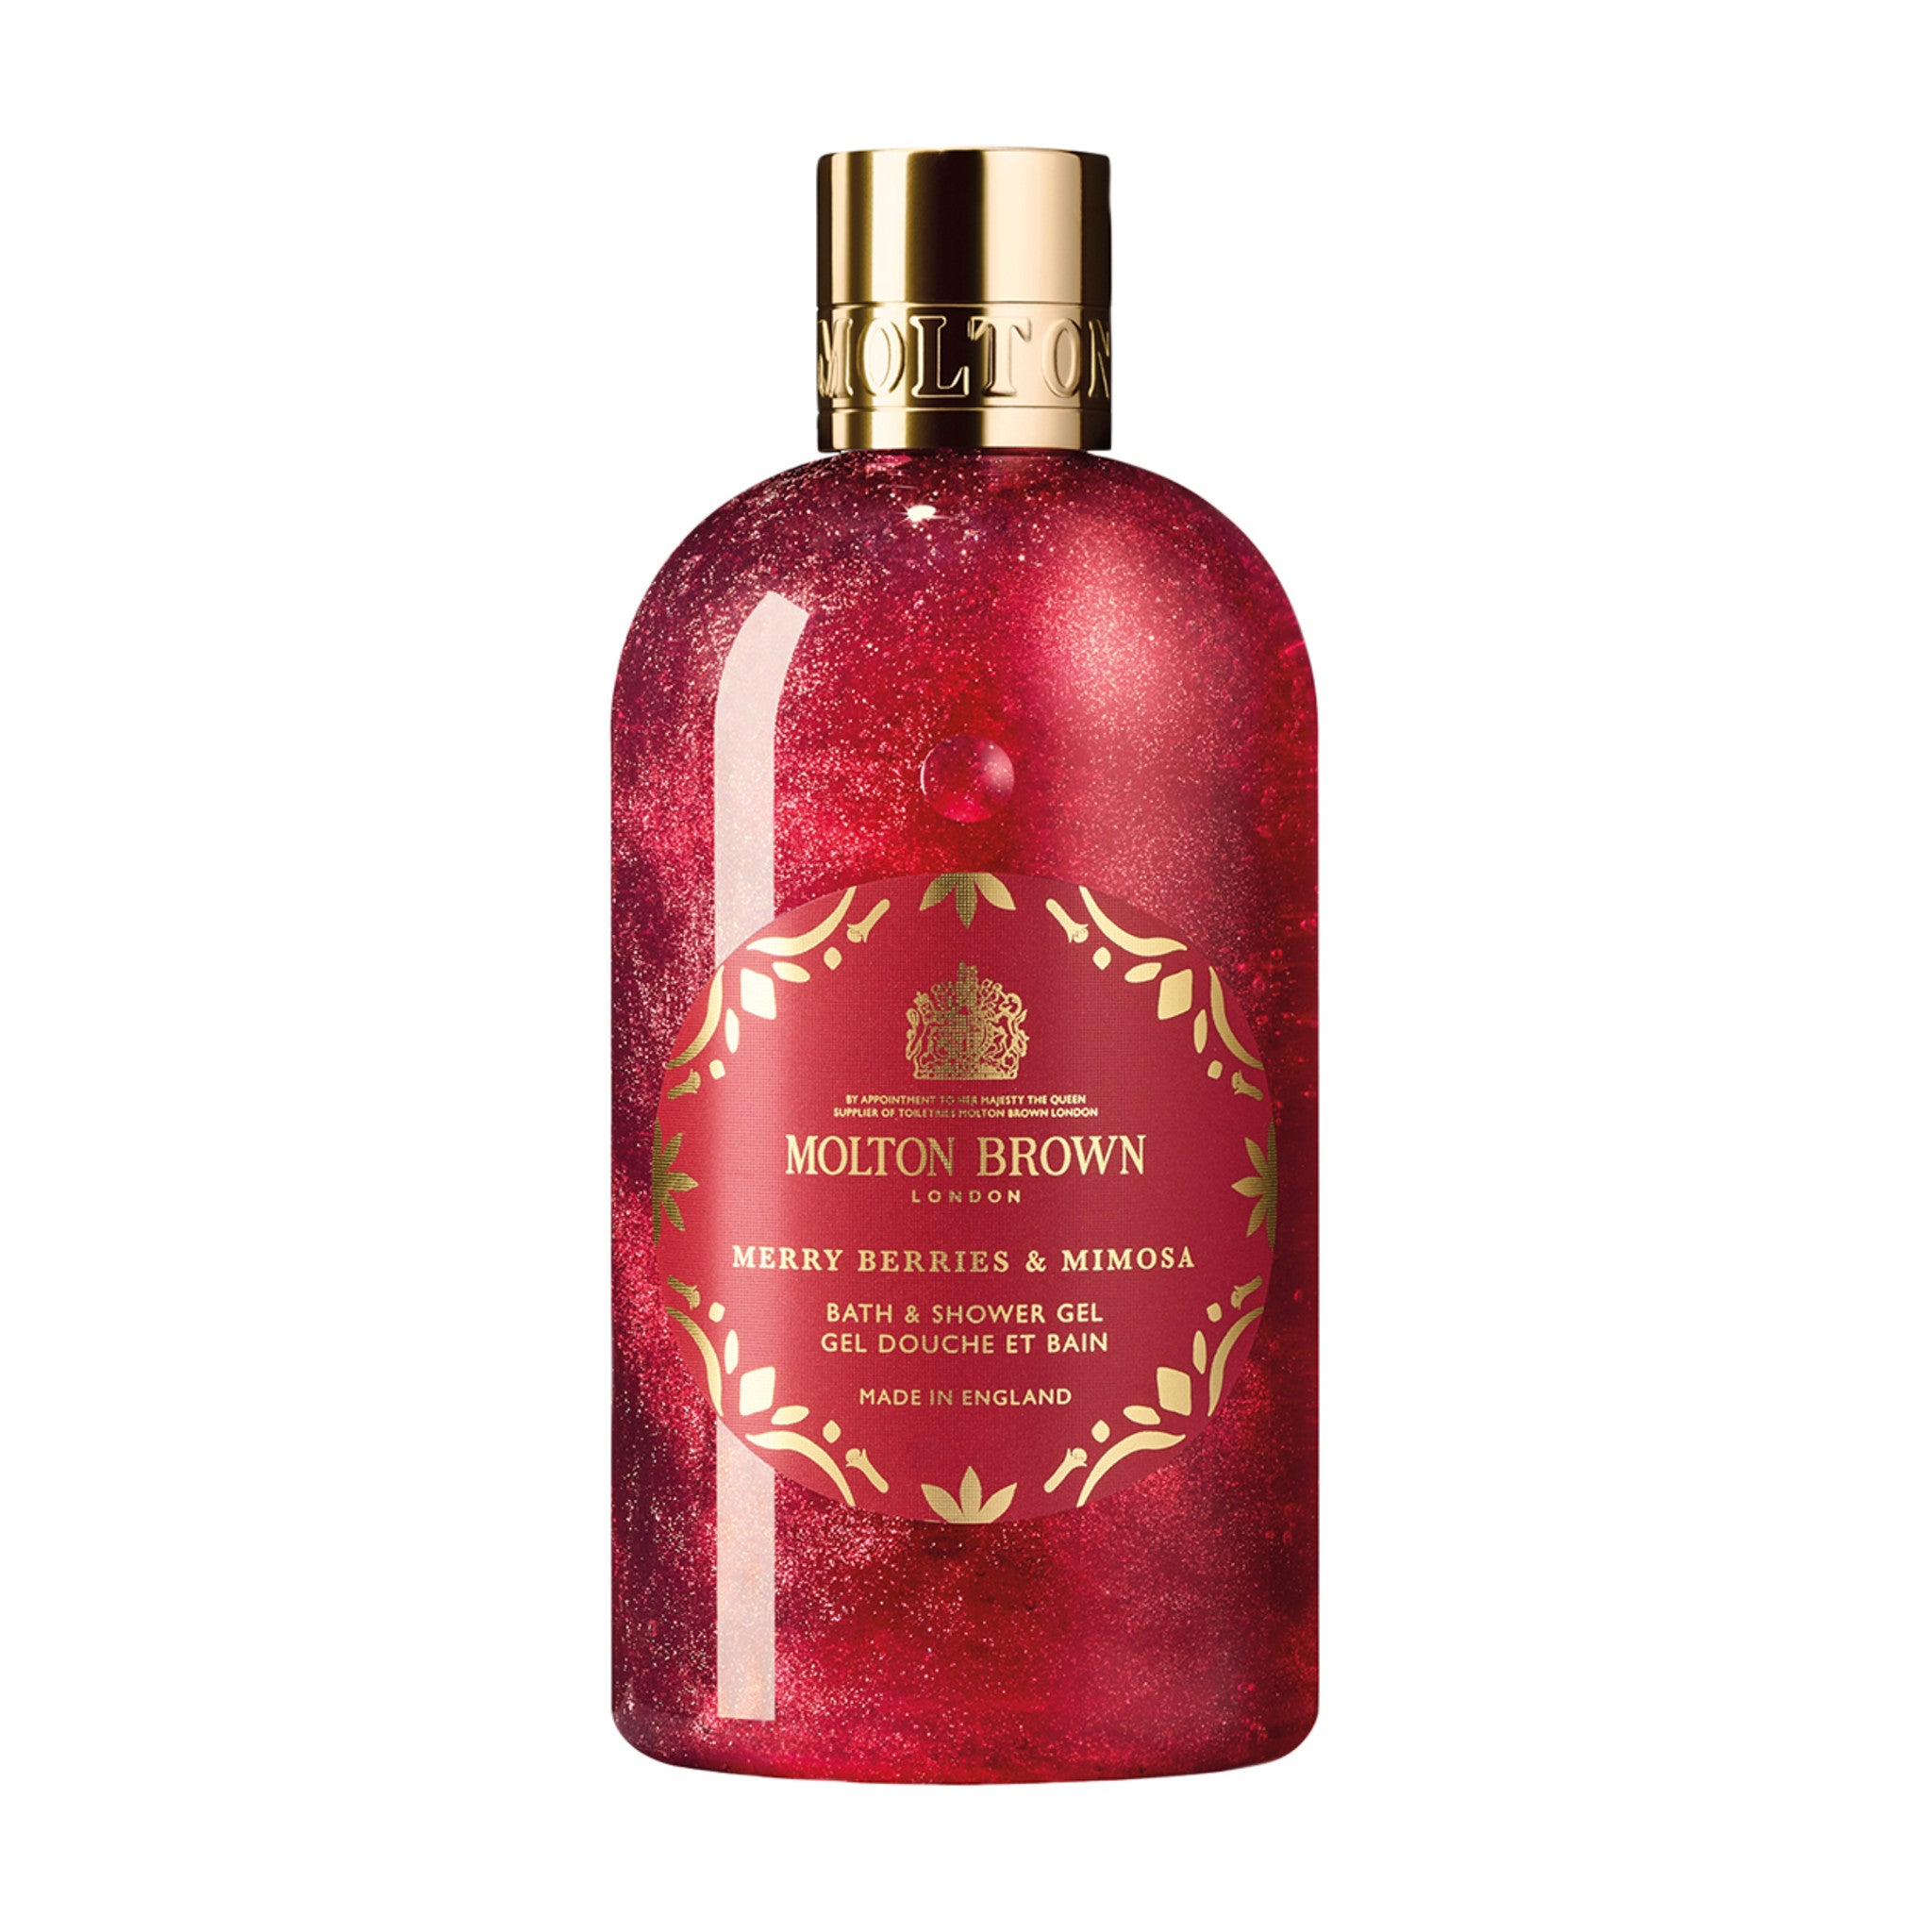 Molton Brown Merry Berries and Mimosa Bath and Shower Gel (Limited Edition) main image.